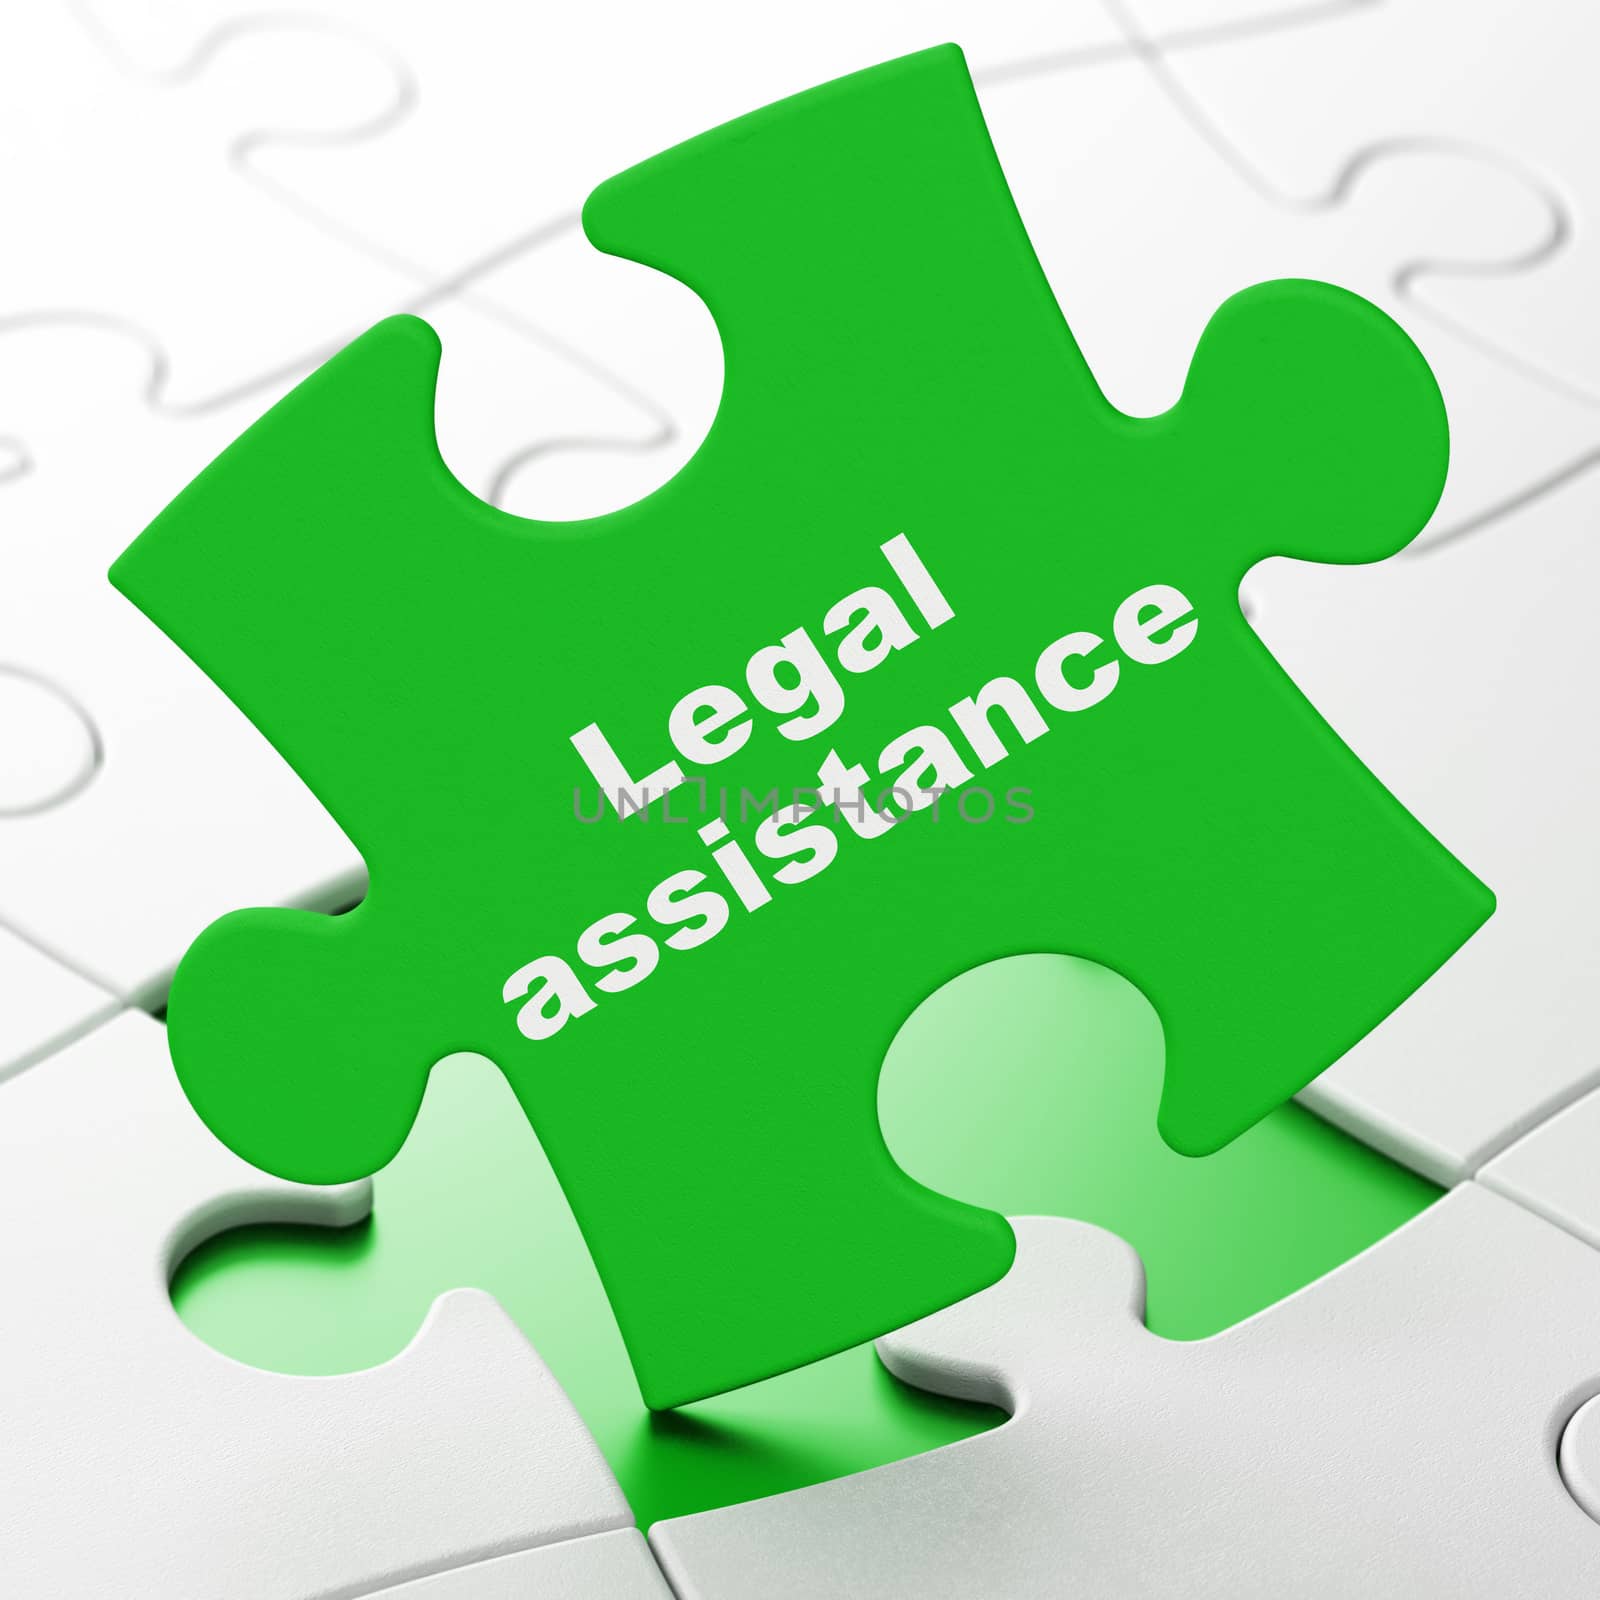 Law concept: Legal Assistance on puzzle background by maxkabakov